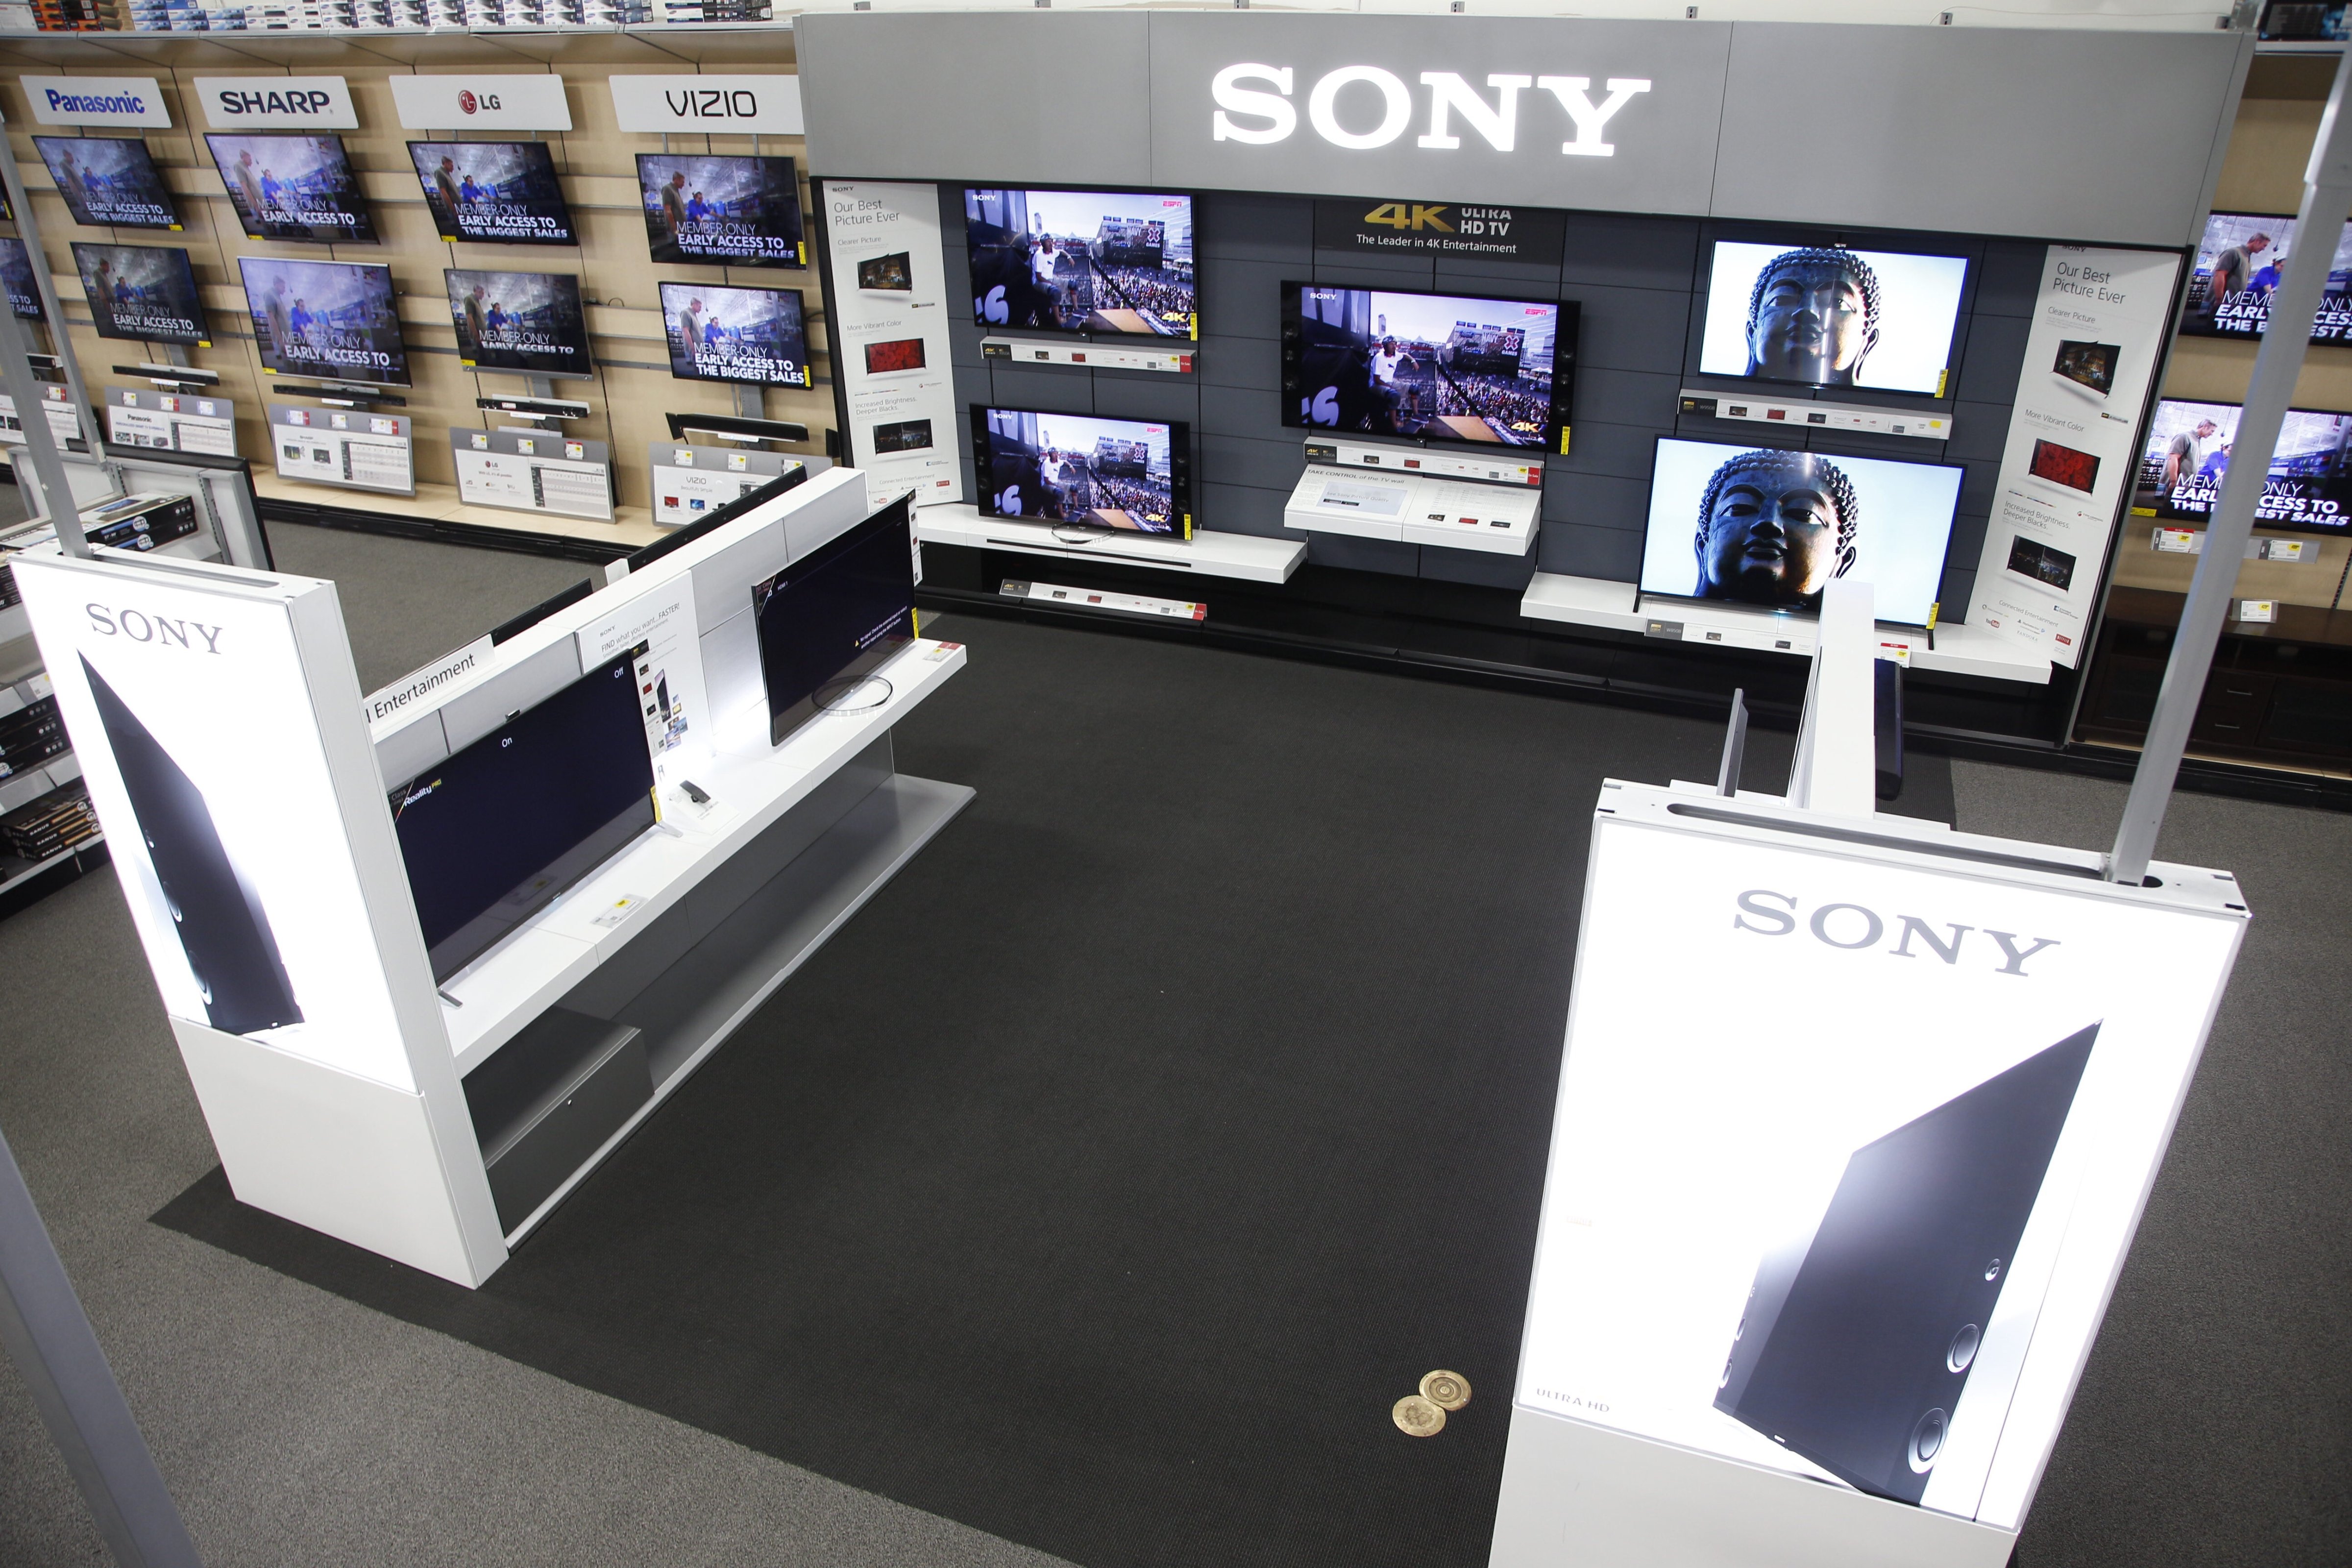 A "Sony Experience at Best Buy" store-within-the-store